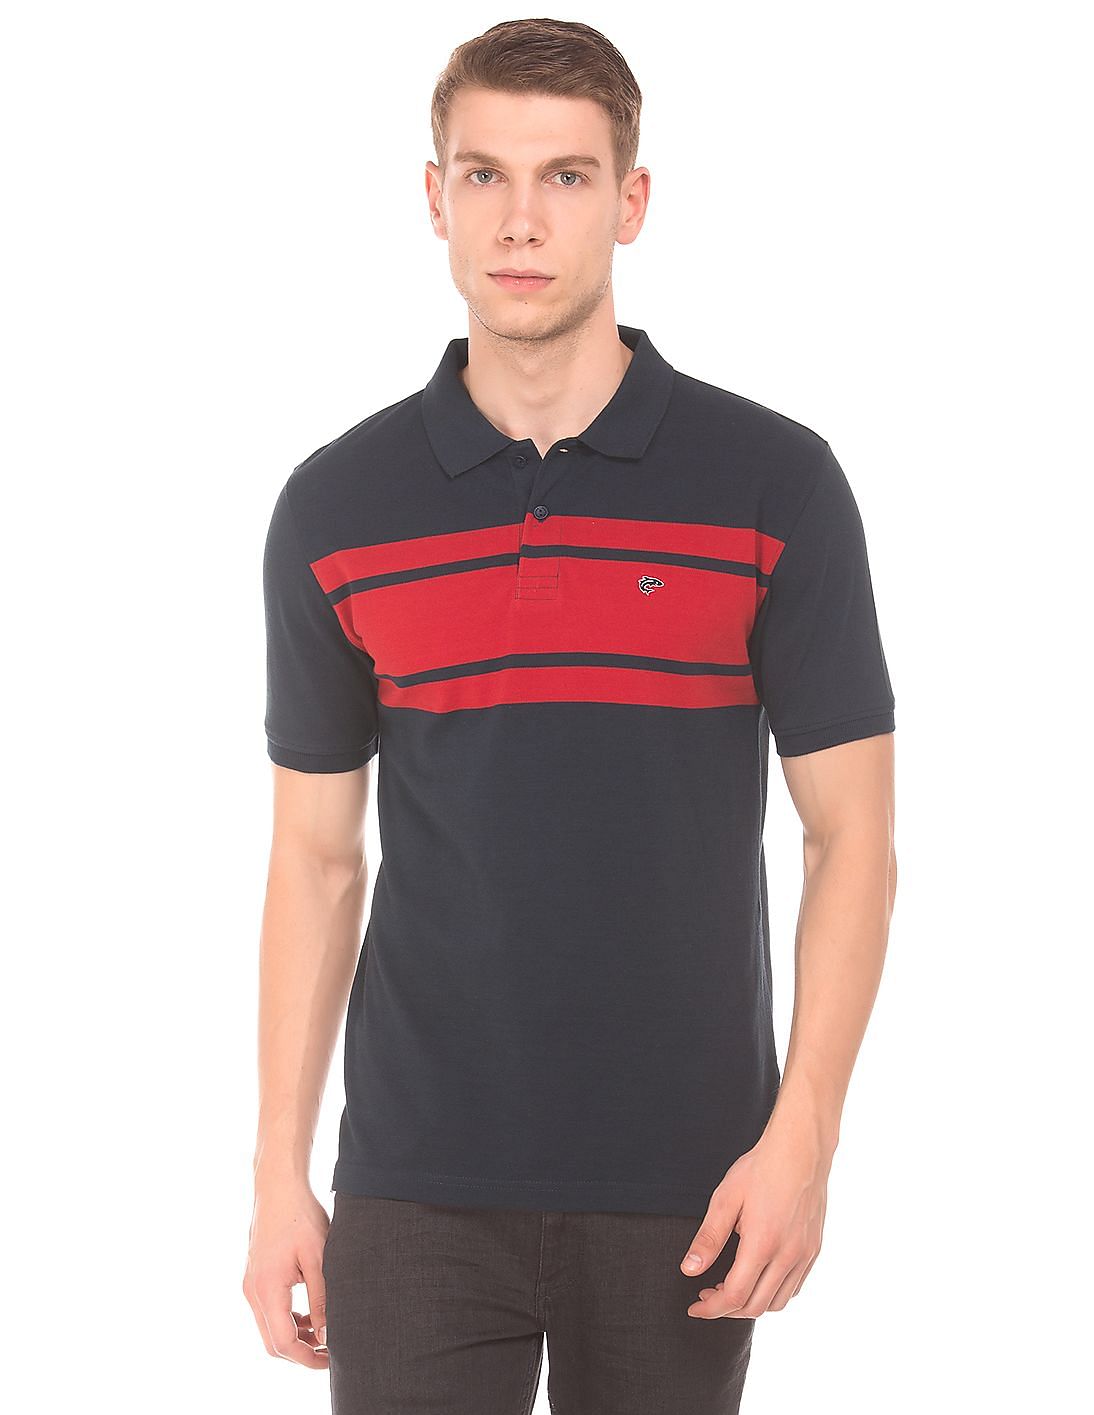 Buy Ruggers Striped Front Regular Fit Polo Shirt - NNNOW.com